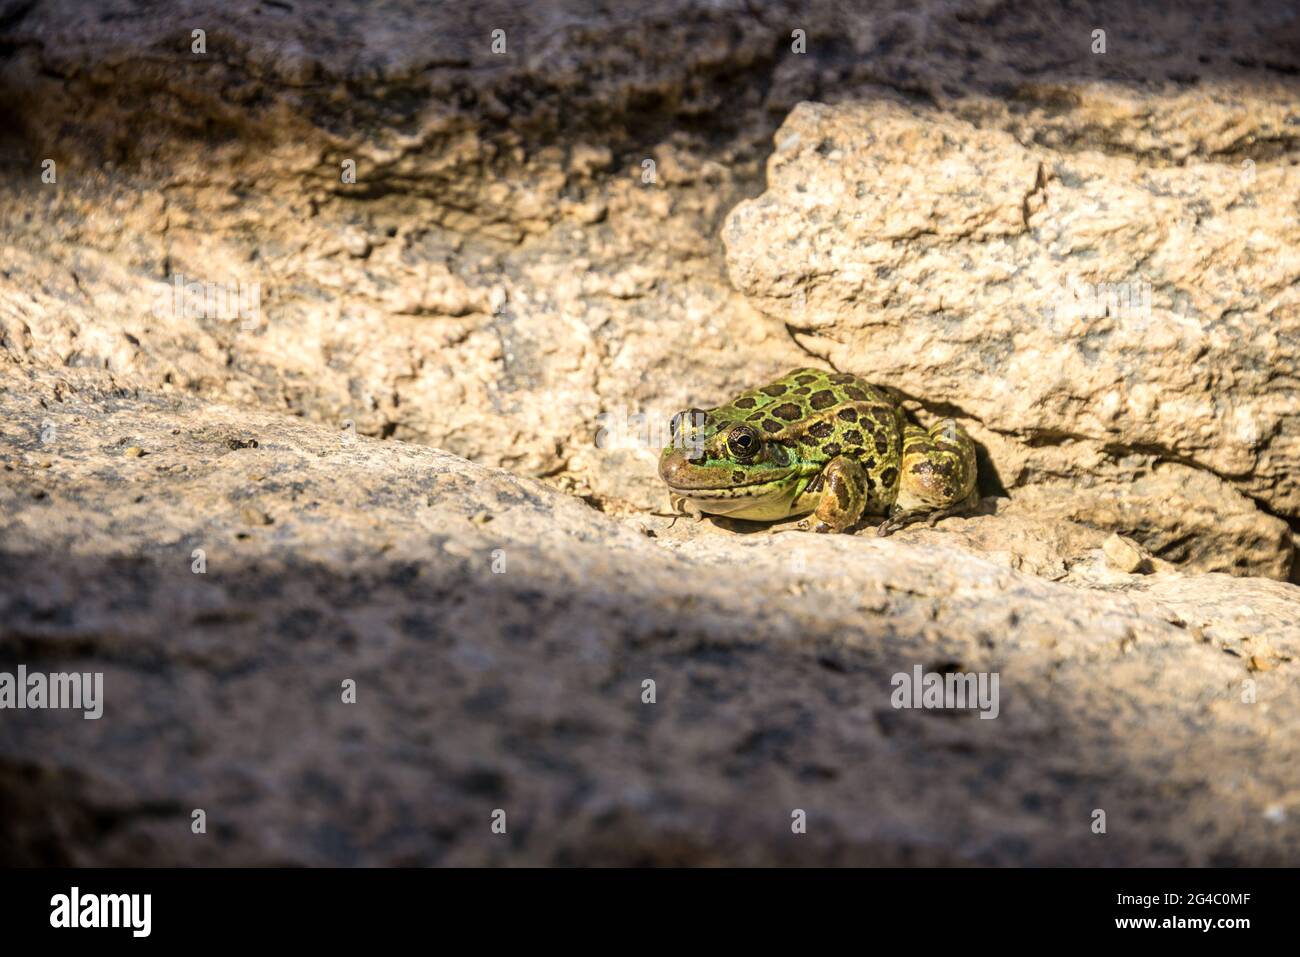 A Frog Stock Photo